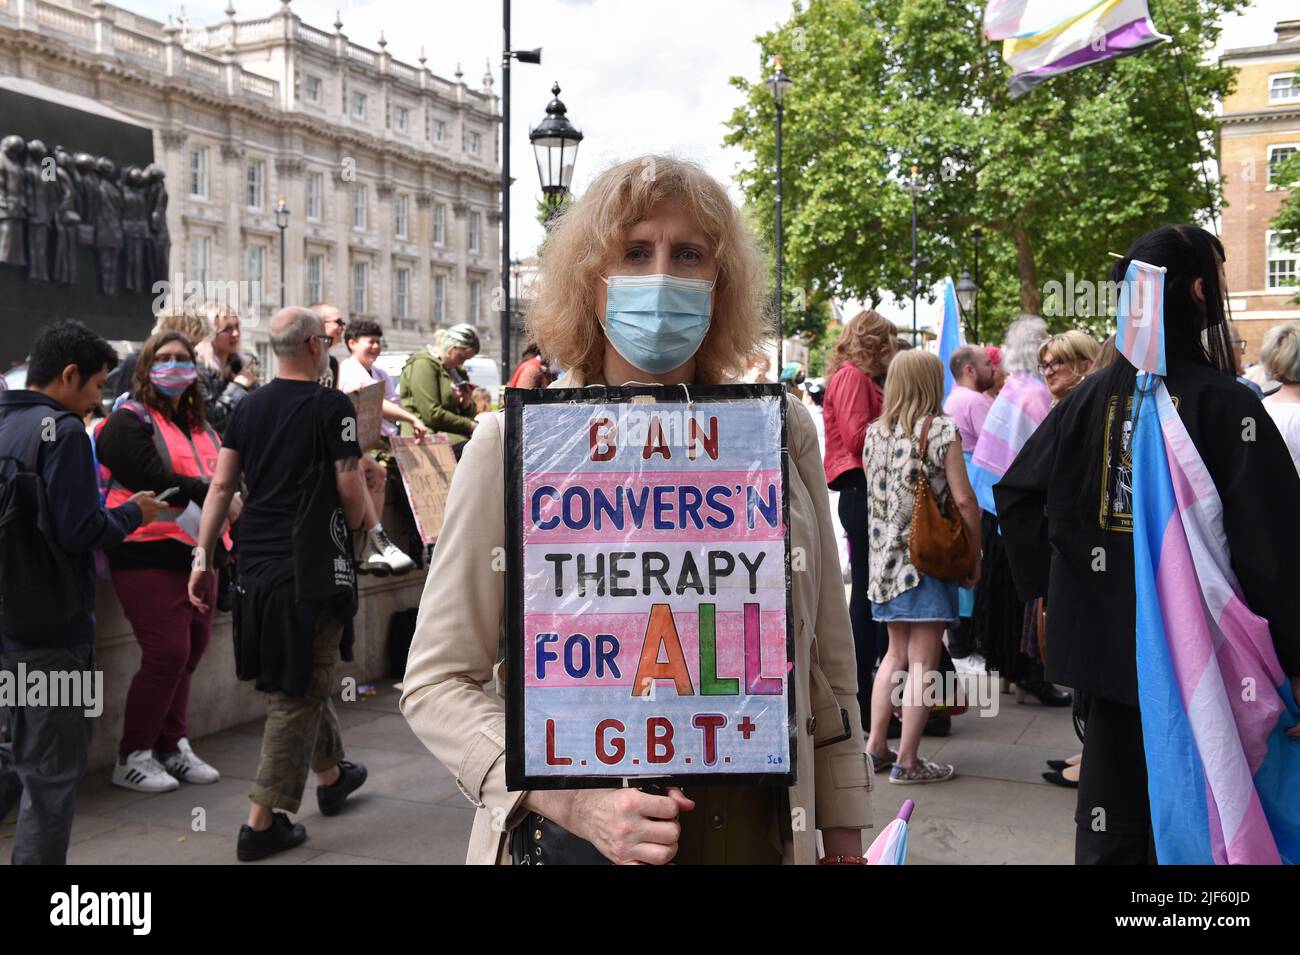 Pro Trans rights activists and protesters, demonstrated opposite Downing Street to stand up for LGBT+ rights and to demand from UK government to implement a trans-inclusive conversion therapy ban. Stock Photo